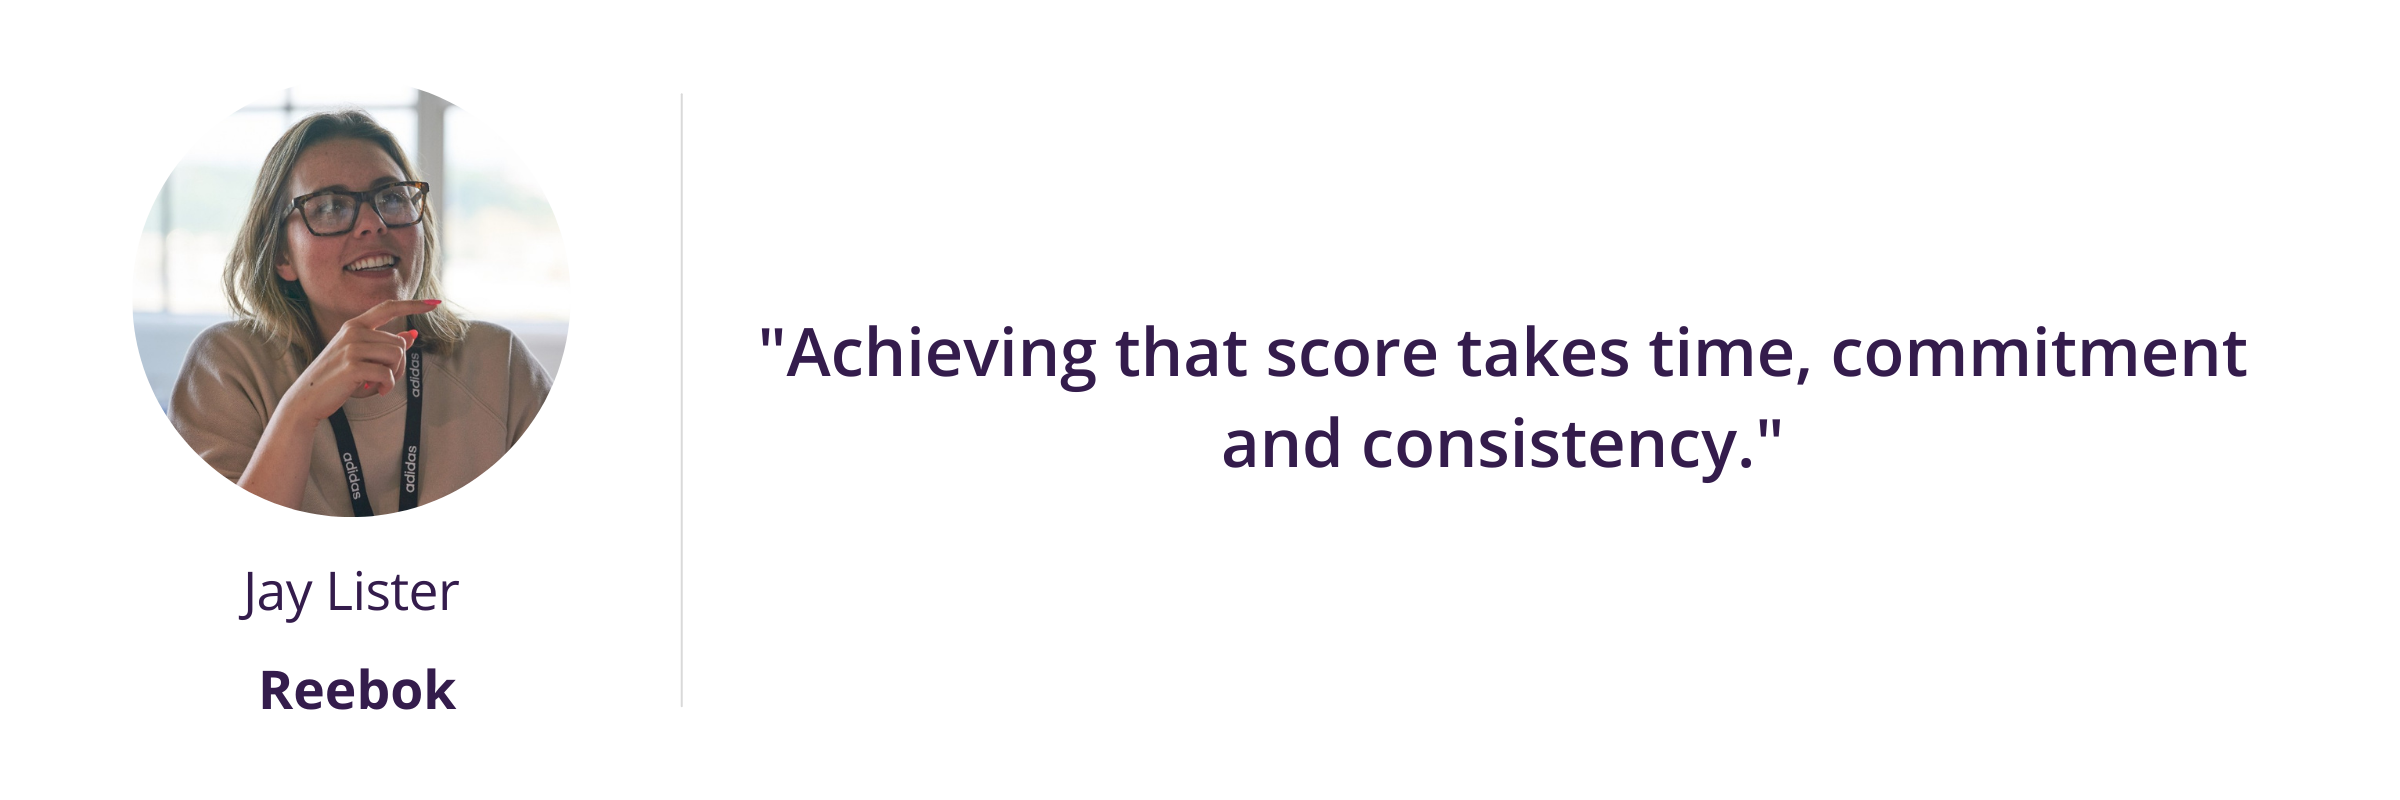 "Achieving that score takes time, commitment and consistency."